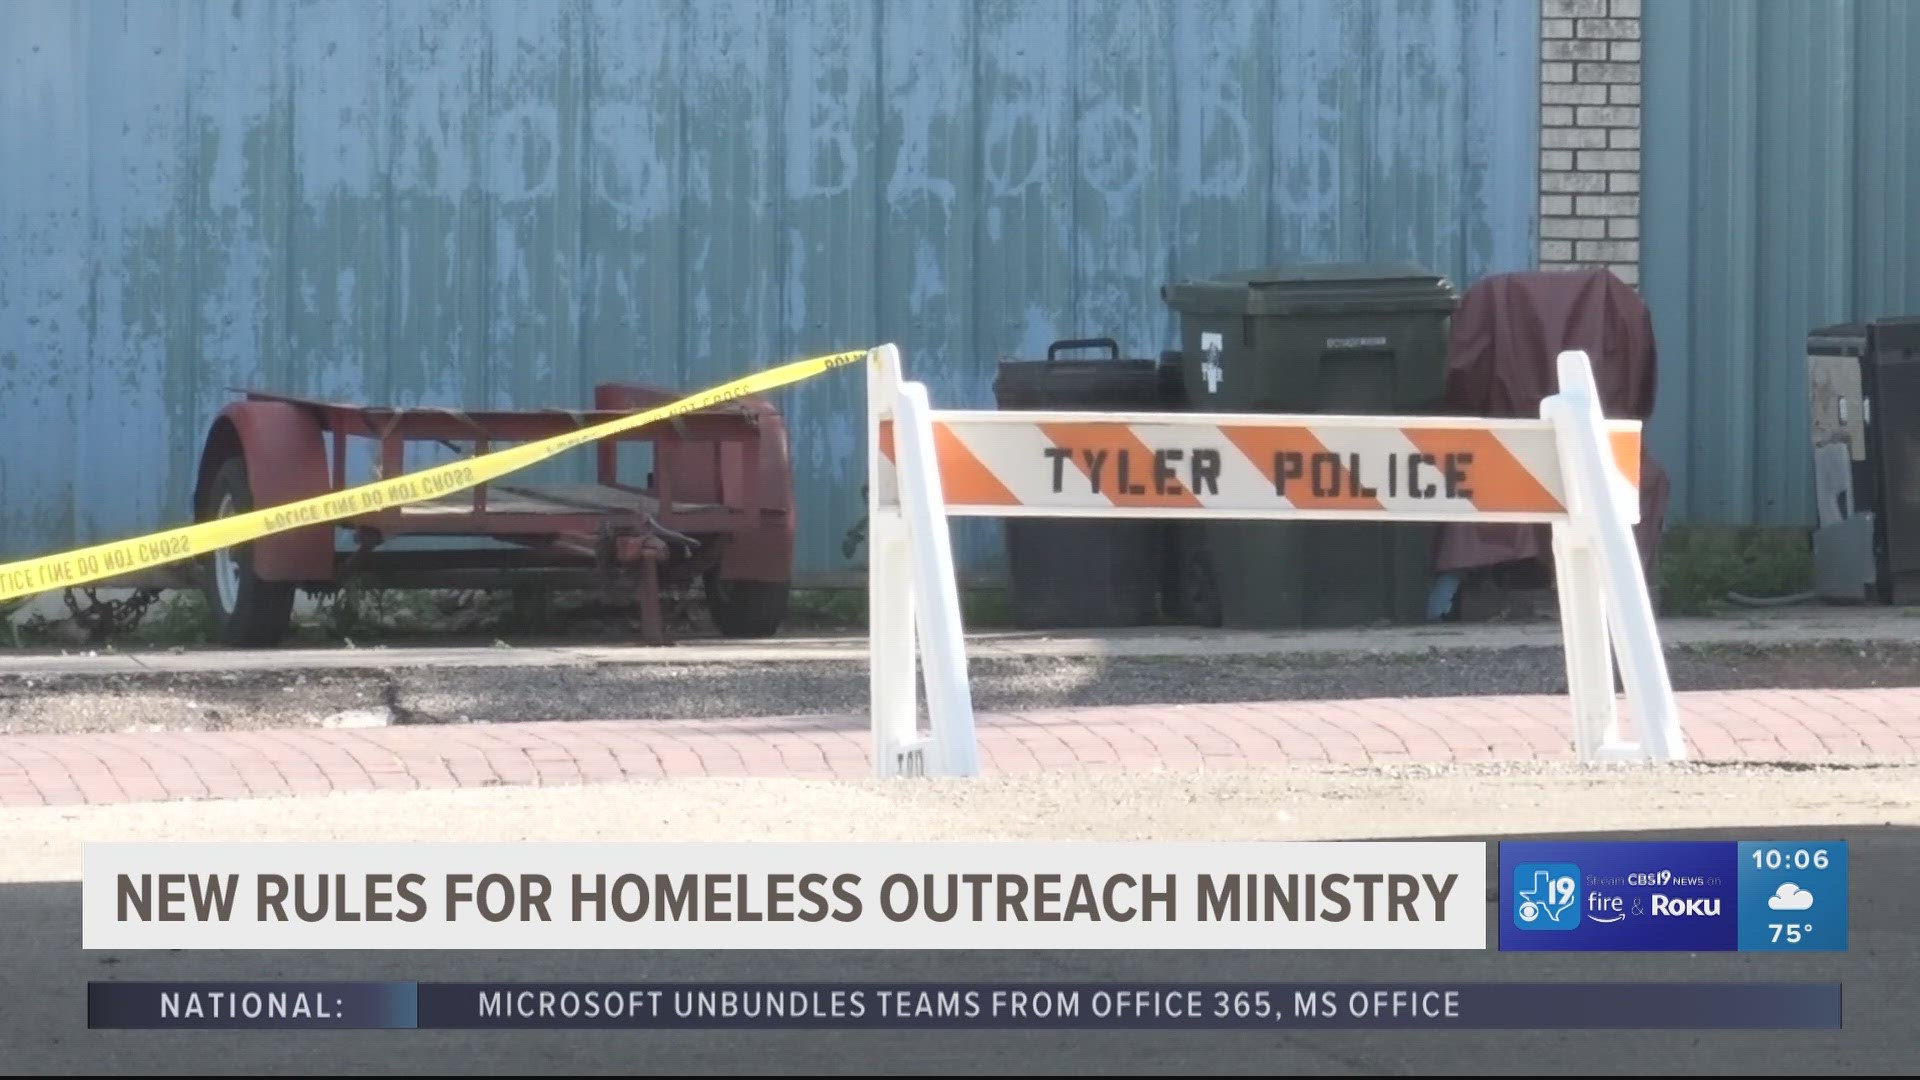 City of Tyler's efforts to clean up under Gentry Bridge leads to changes for homeless outreach ministry